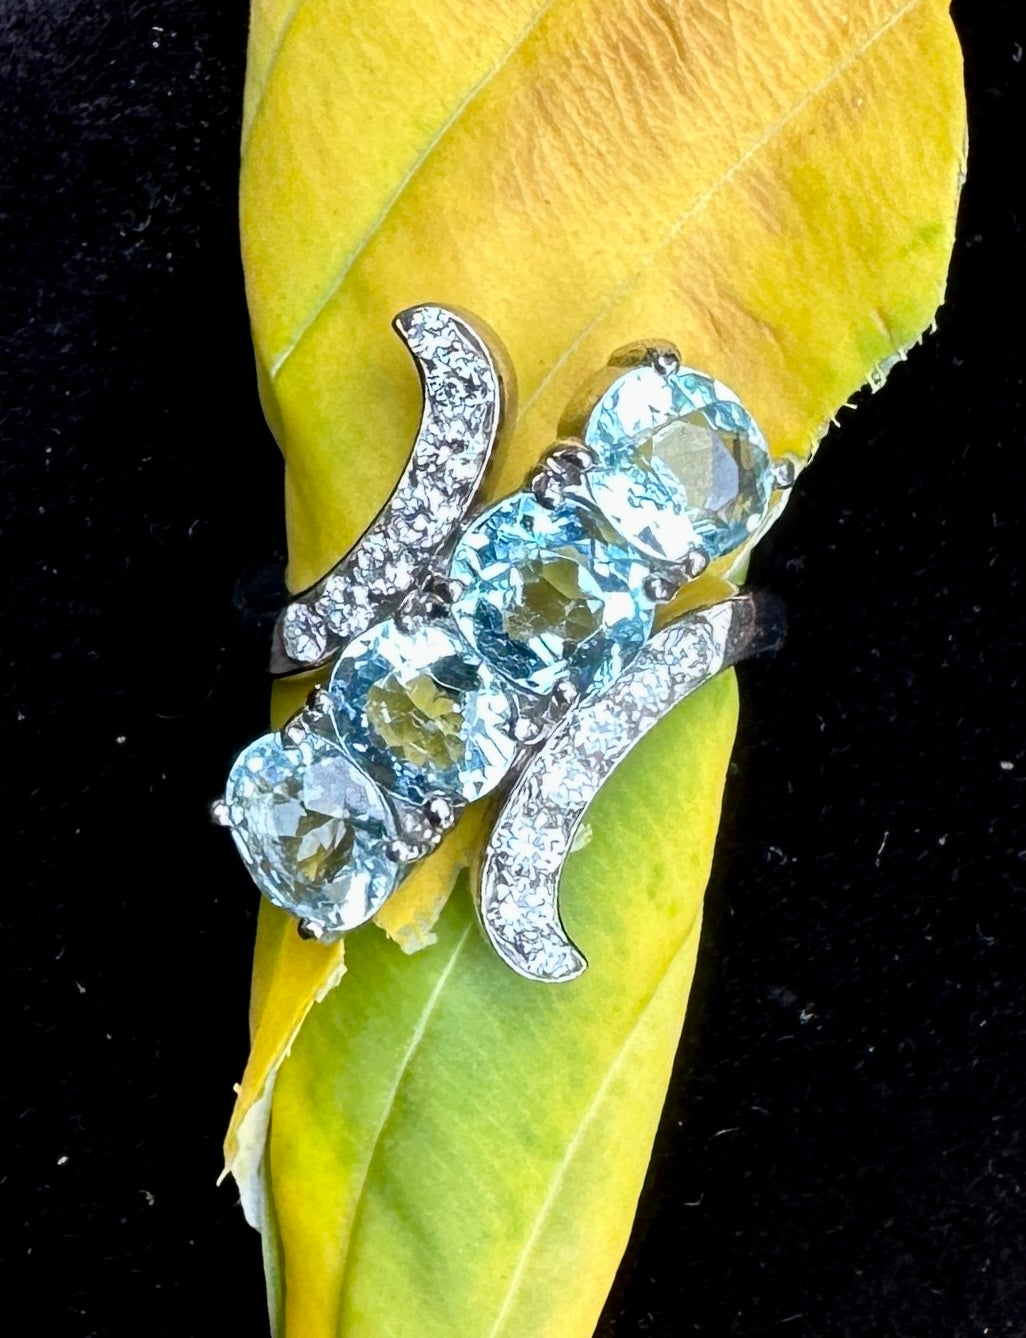 This is a magnificent Art Deco Aquamarine and Diamond Ring in a Palladium setting of great beauty.  The Art Deco masterpiece of a ring is centered by four gorgeous Oval Faceted Natural Aquamarine gems with exquisite Aqua color.  The Aquamarines are